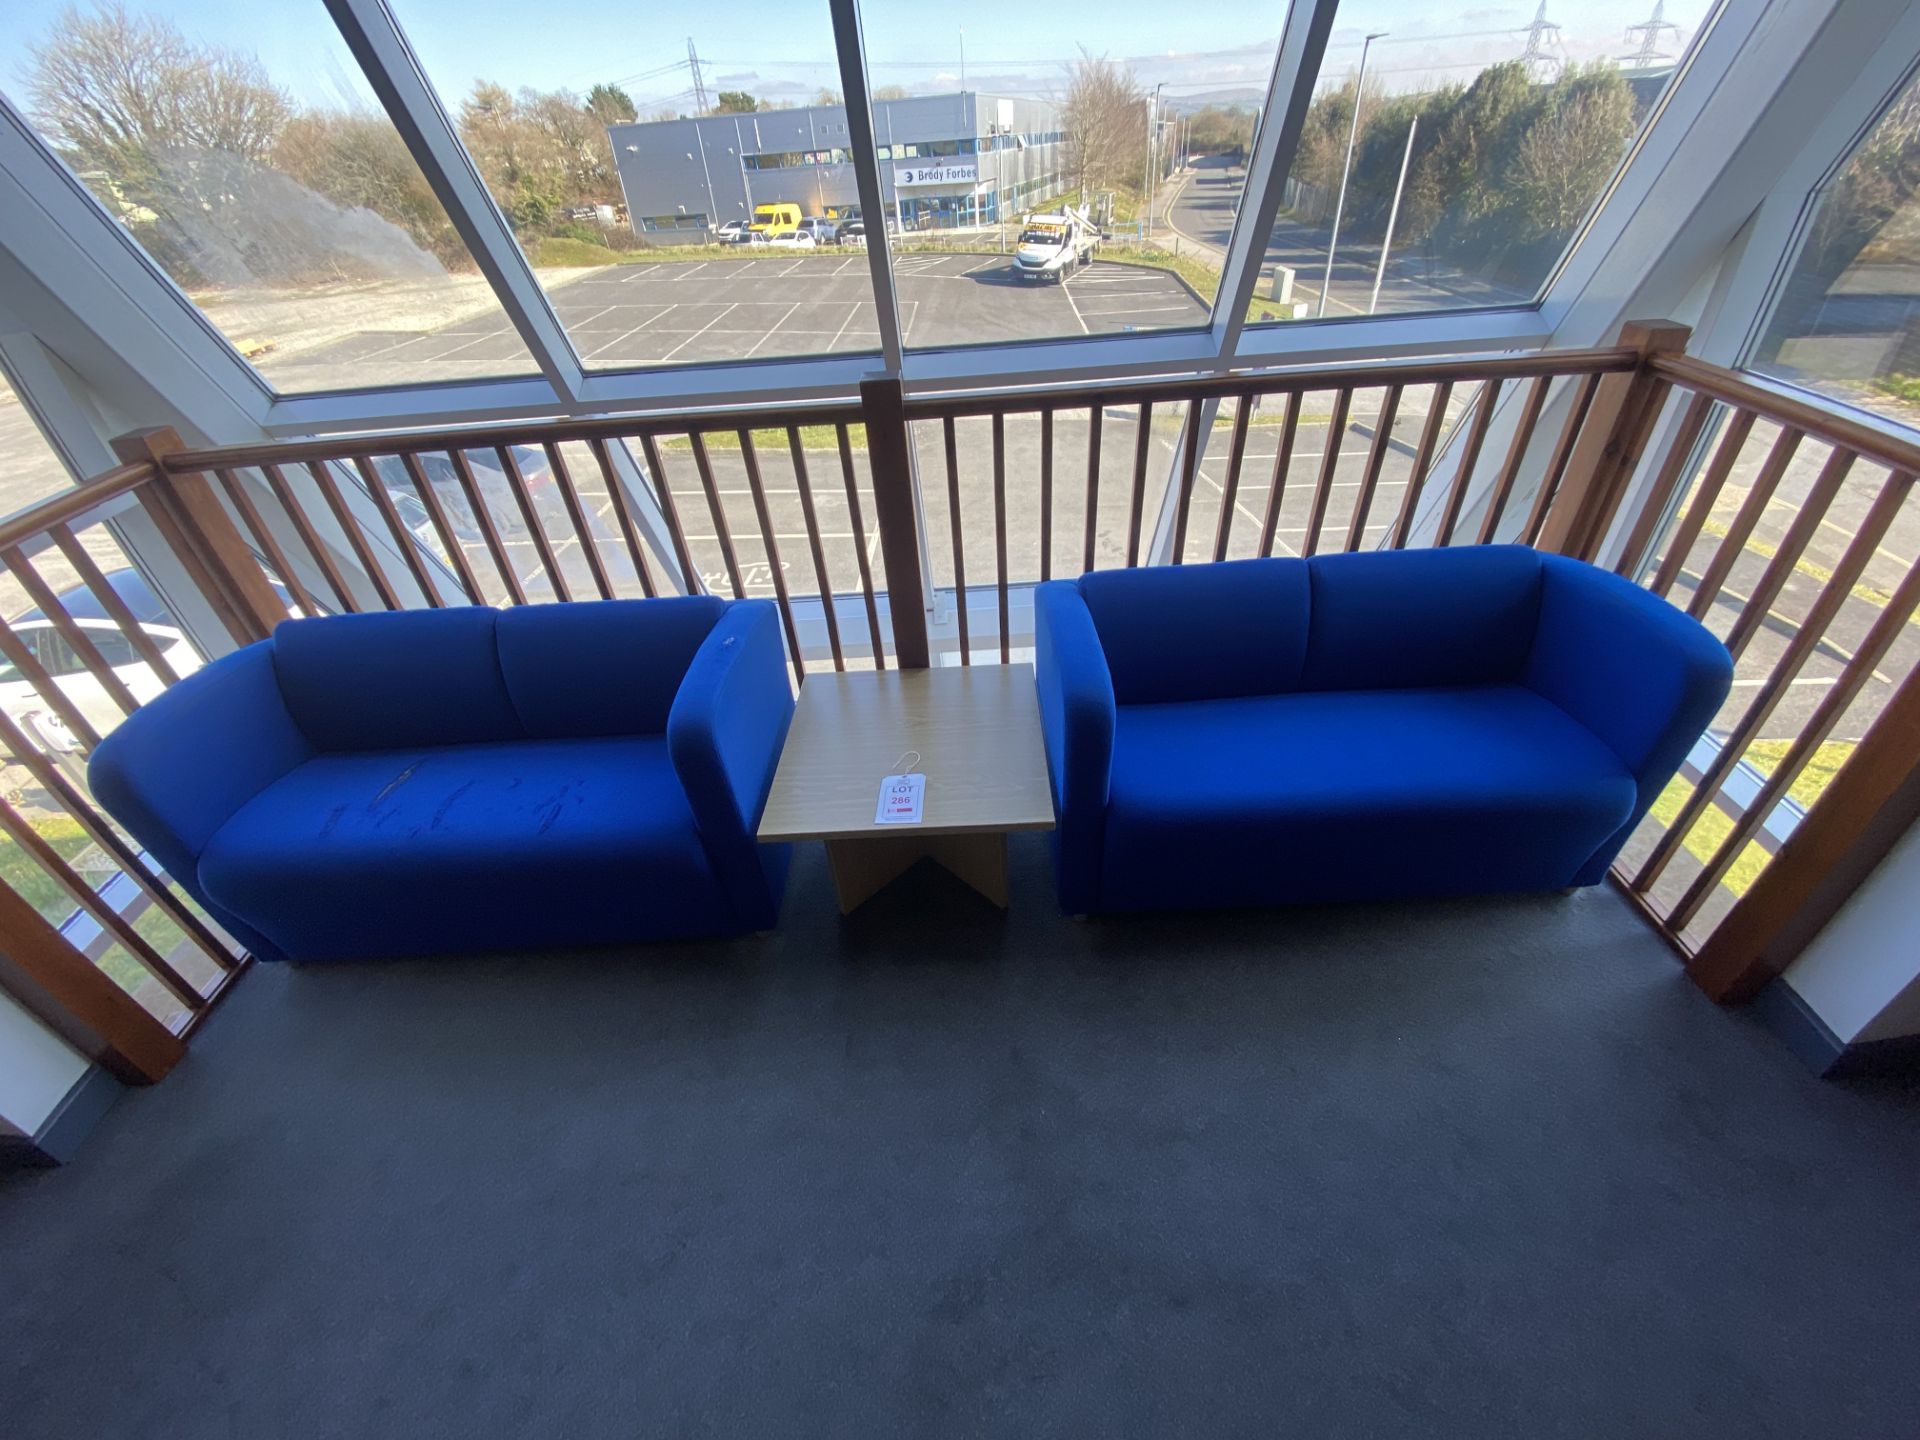 Office waiting room furniture, to include two blue single upholstered seats, two blue double